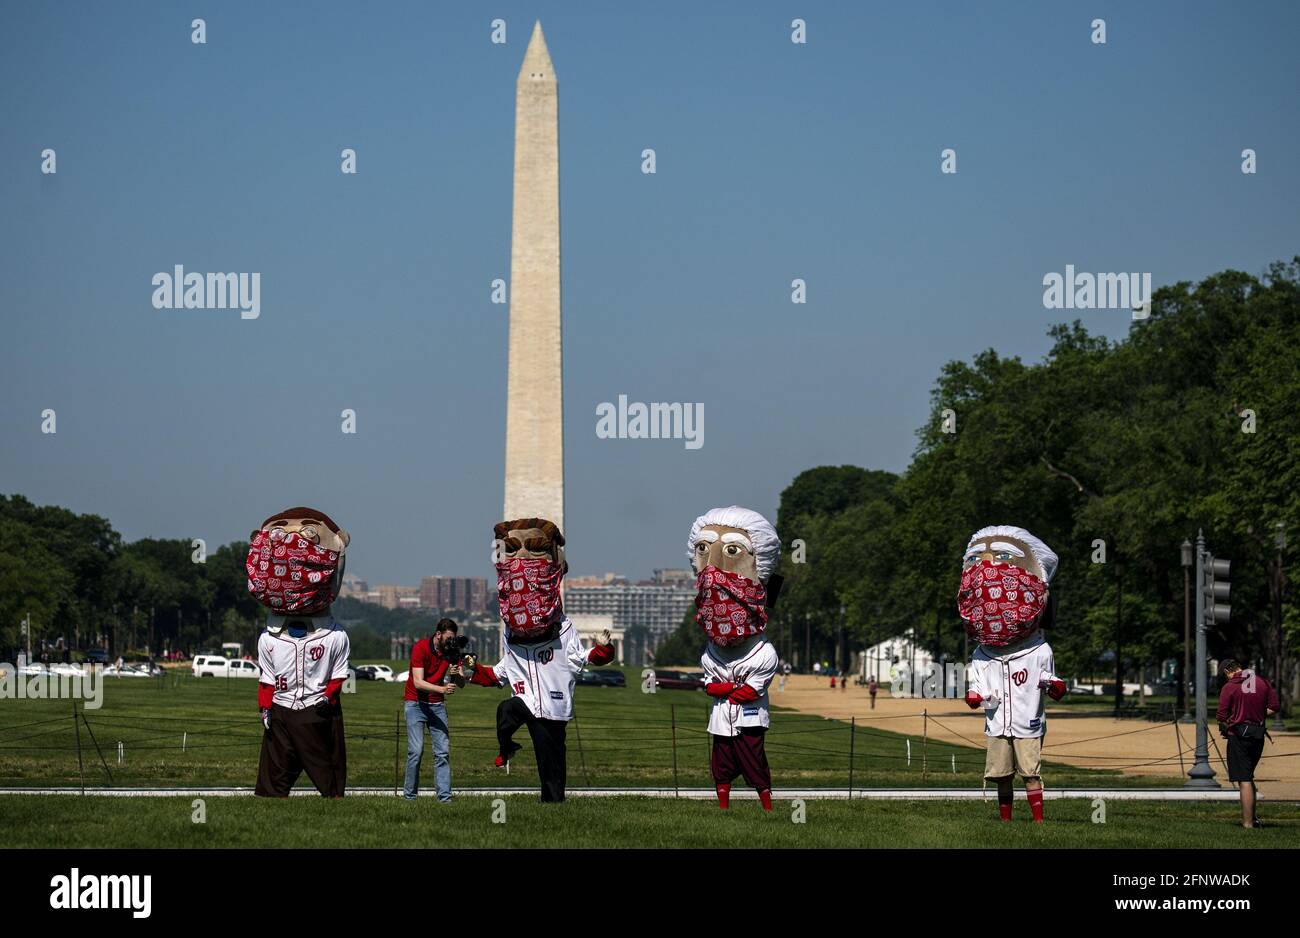 Washington, United States. 19th May, 2021. The Nationals racing presidents are filming scenes on the national mall near the US Capitol in Washington, DC on Wednesday, May 19, 2021. The Presidents Race has featured likenesses of seven former Presidents of the United States, four of whom are found on Mount Rushmore: George Washington, Abraham Lincoln, Thomas Jefferson, and Theodore Roosevelt, race around the field in the middle of the fourth inning of every home game. Photo by Tasos Katopodis/UPI Credit: UPI/Alamy Live News Stock Photo